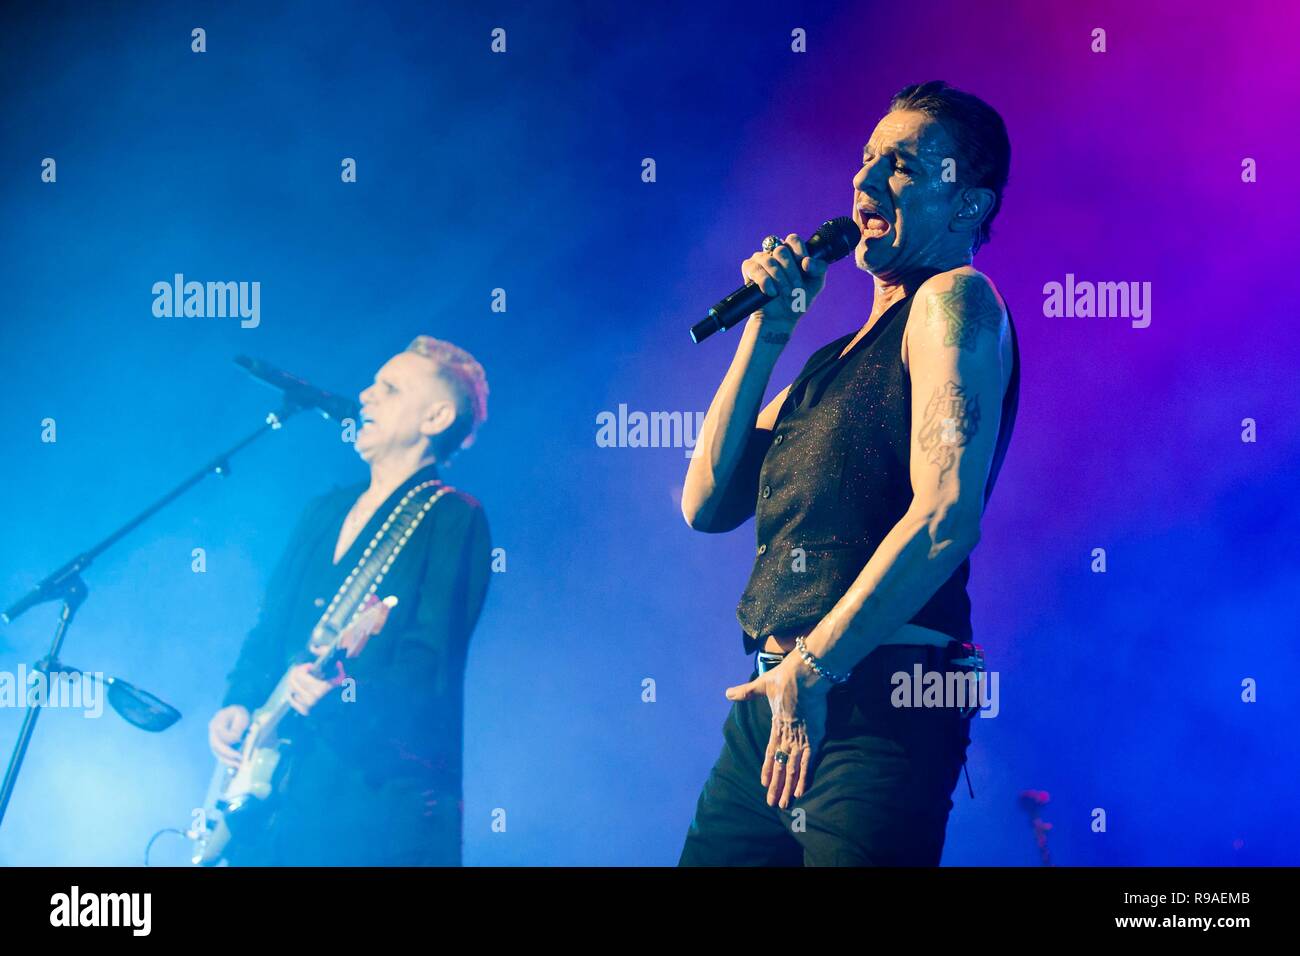 January 11, 2018 - The British synth rock and synth pop group Depeche Mode  live on their Global Spirit Tour at the Barclaycard Arena in Hamburg.  Martin Gore and Dave Gahan enjoy